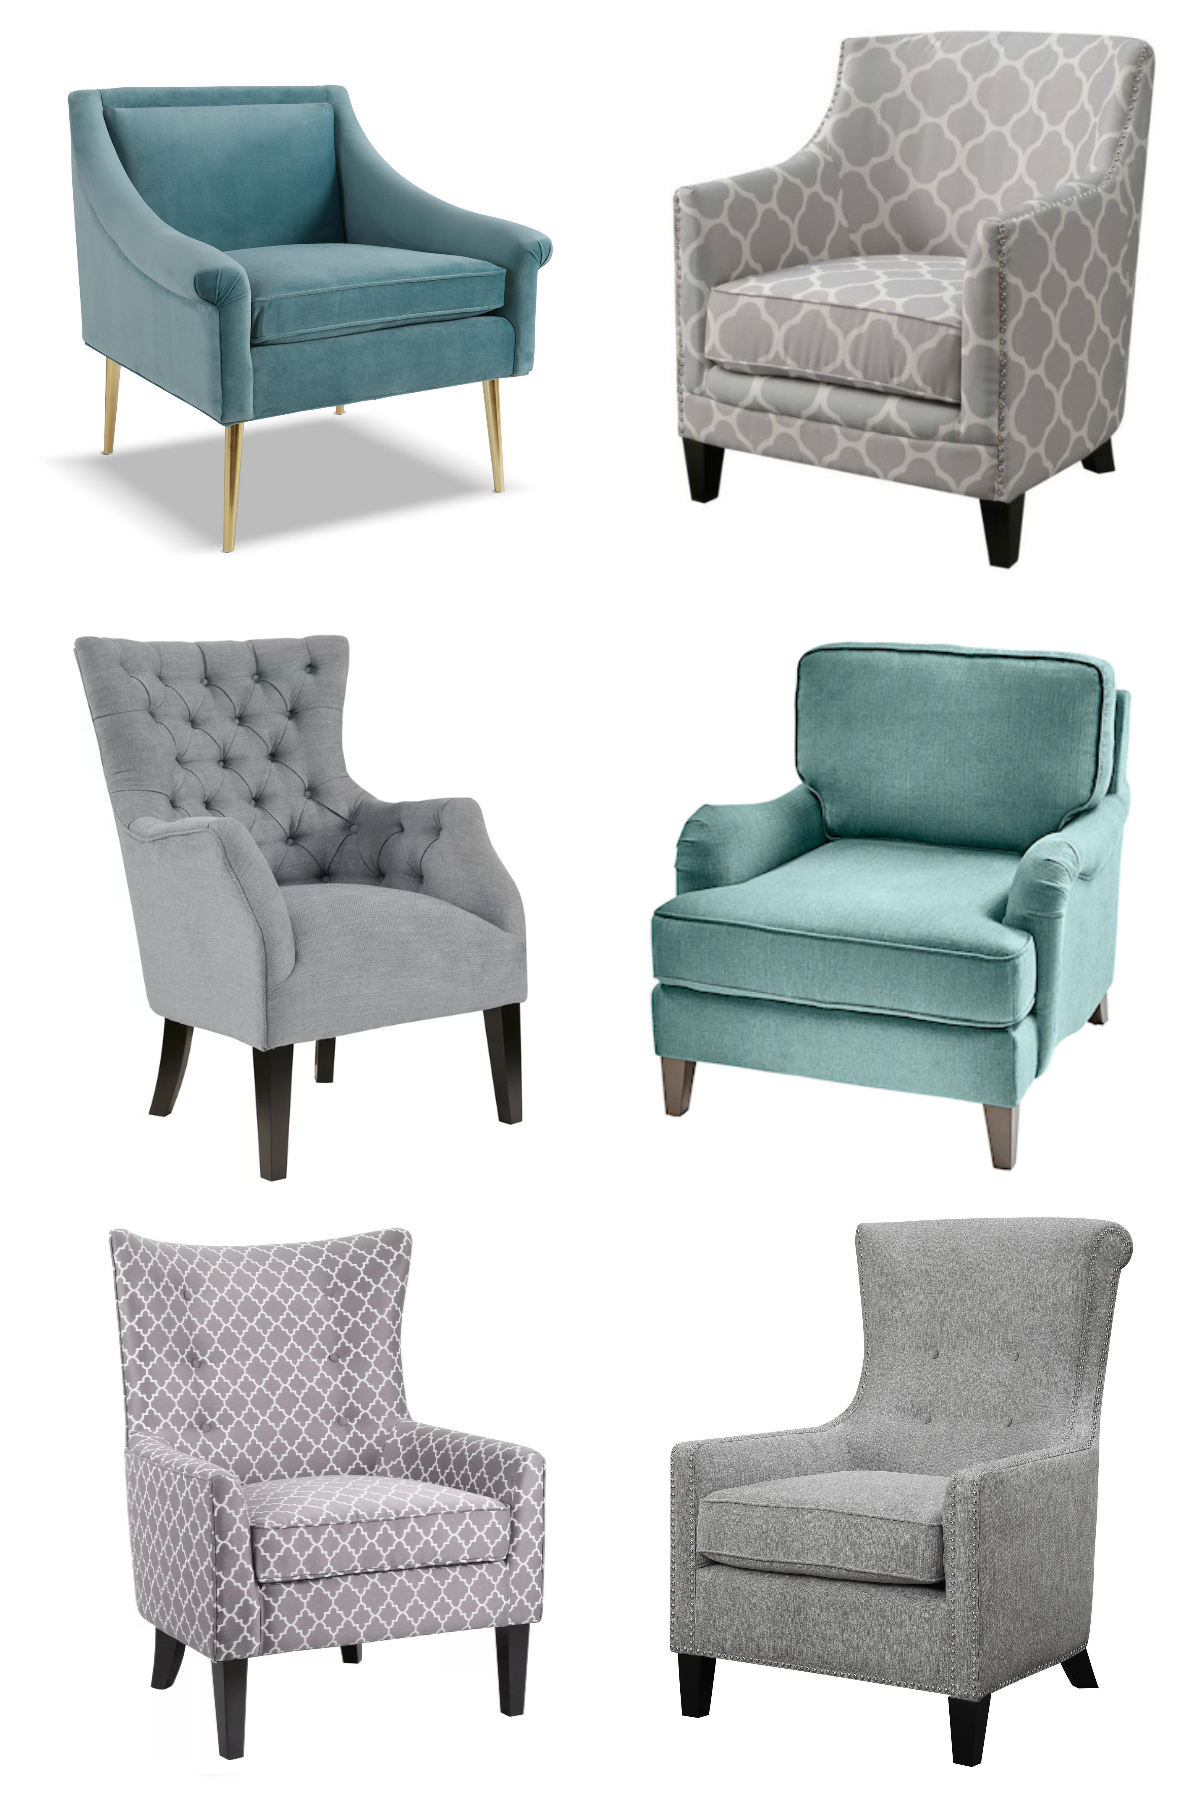 New Living Room Chair Options (Most Under $500!!)